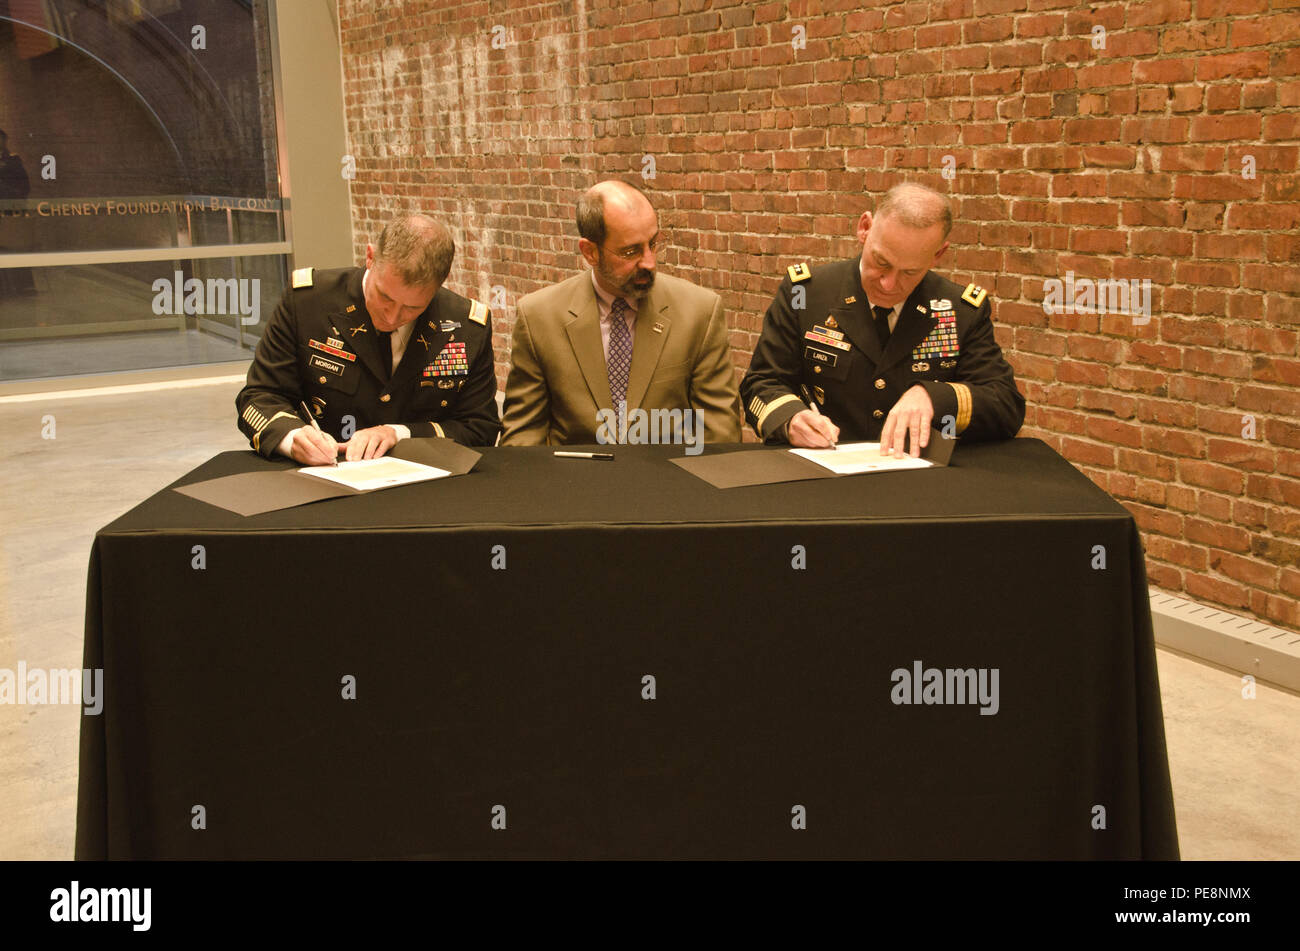 Col. Daniel S. Morgan, commander, Joint Base Lewis-McChord, left, Mark A. Pagano, chancellor, University of Washington Tacoma, center, and Lt. Gen. Stephen R. Lanza, commanding general, I Corps, JBLM, right, come together to sign partnership resolutions at the University of Washington Tacoma, Oct. 29, 2015. The partnership resolution allows for the military and the UW-T to work together to improve life in the South Sound region for all residents. (U.S. Army photo by Sgt. Jasmine Higgins, 28th Public Affairs Detachment) Stock Photo